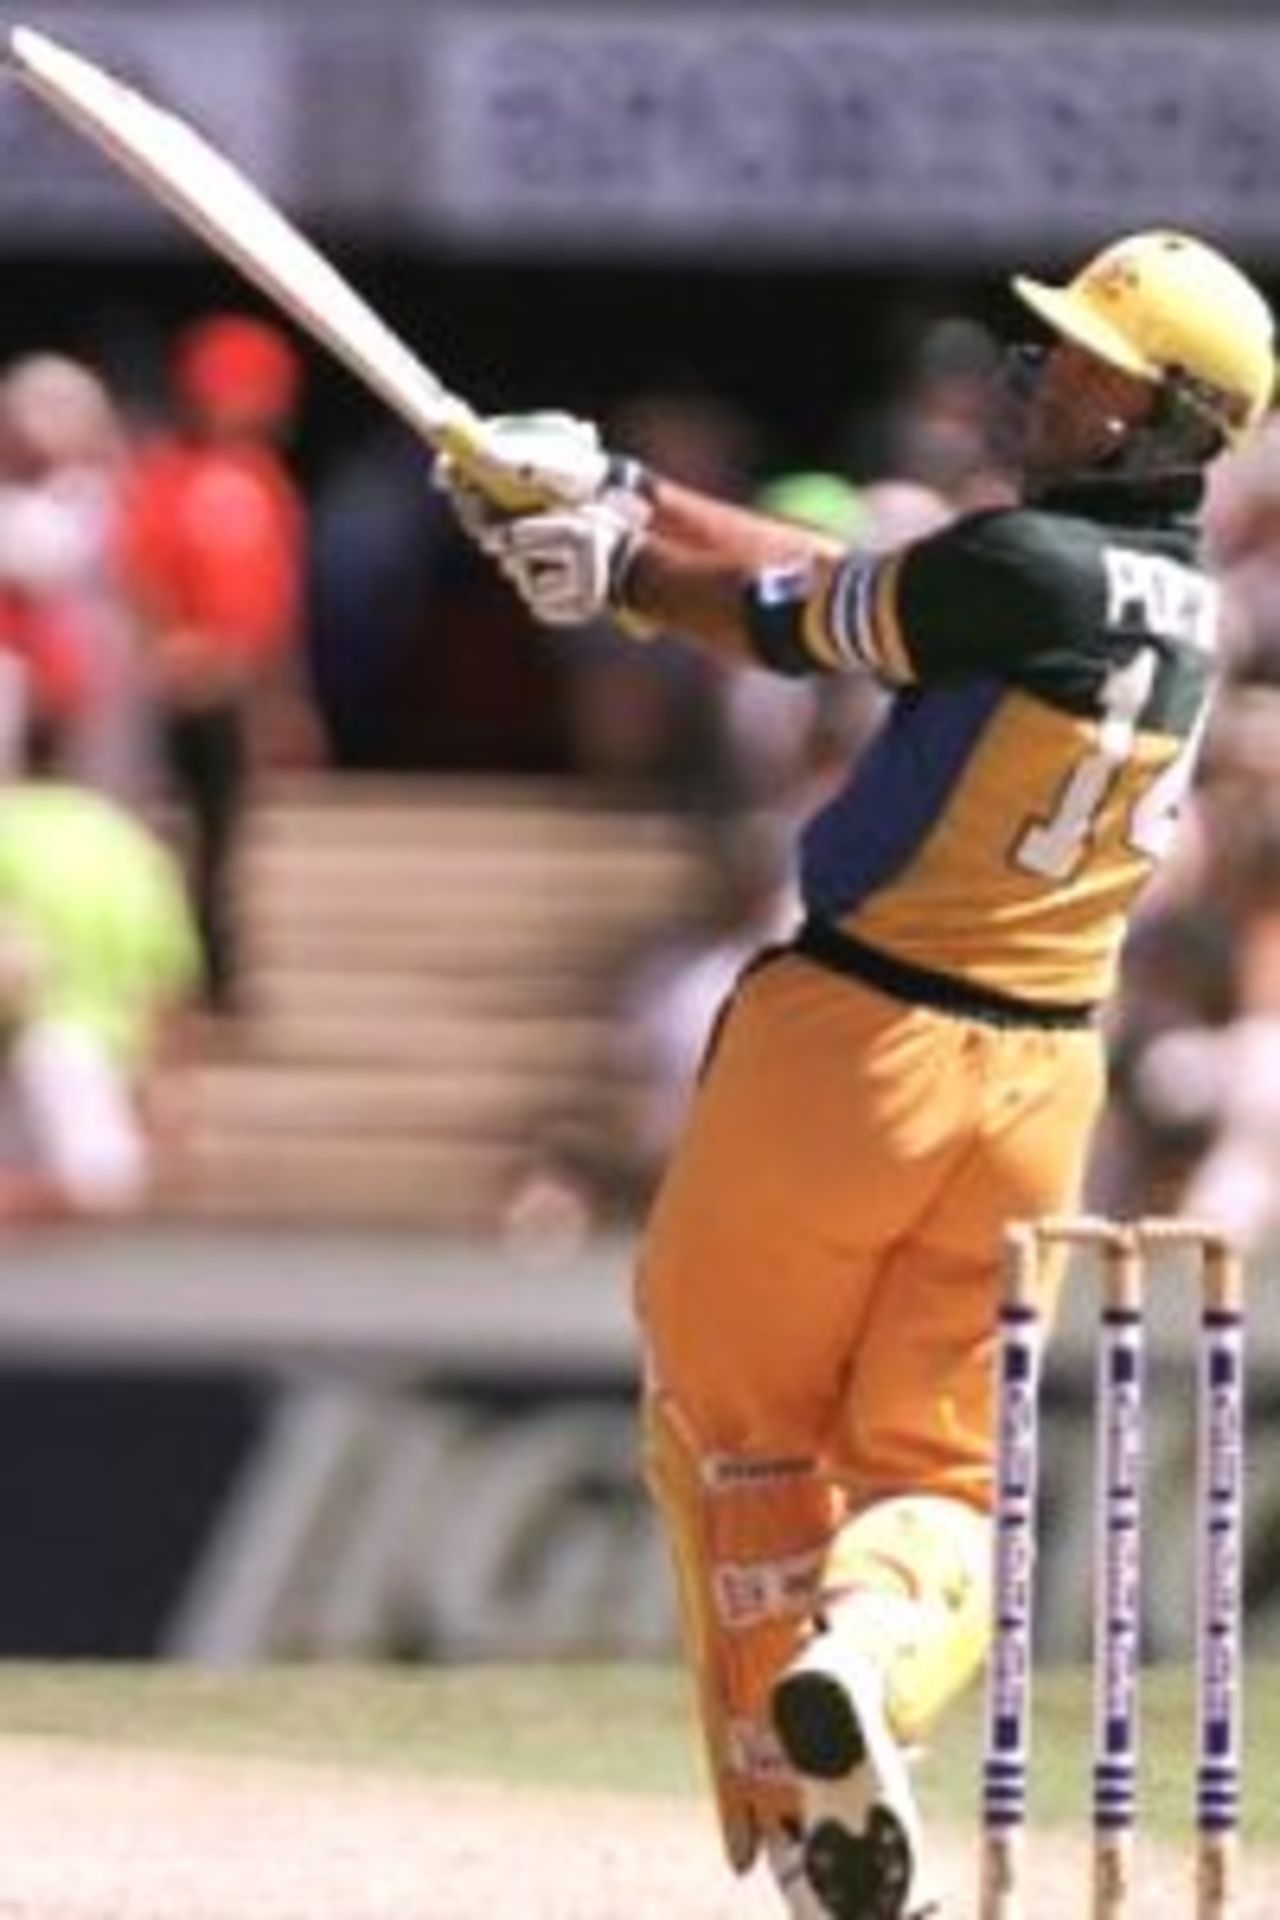 4 Feb 2000: Ricky Ponting of Australia pulls a short ball for four during his innings of 78 against Pakistan during the Carlton and United Breweries one day international between Australia and Pakistan at the Sydney Cricket Ground, Sydney, Australia.